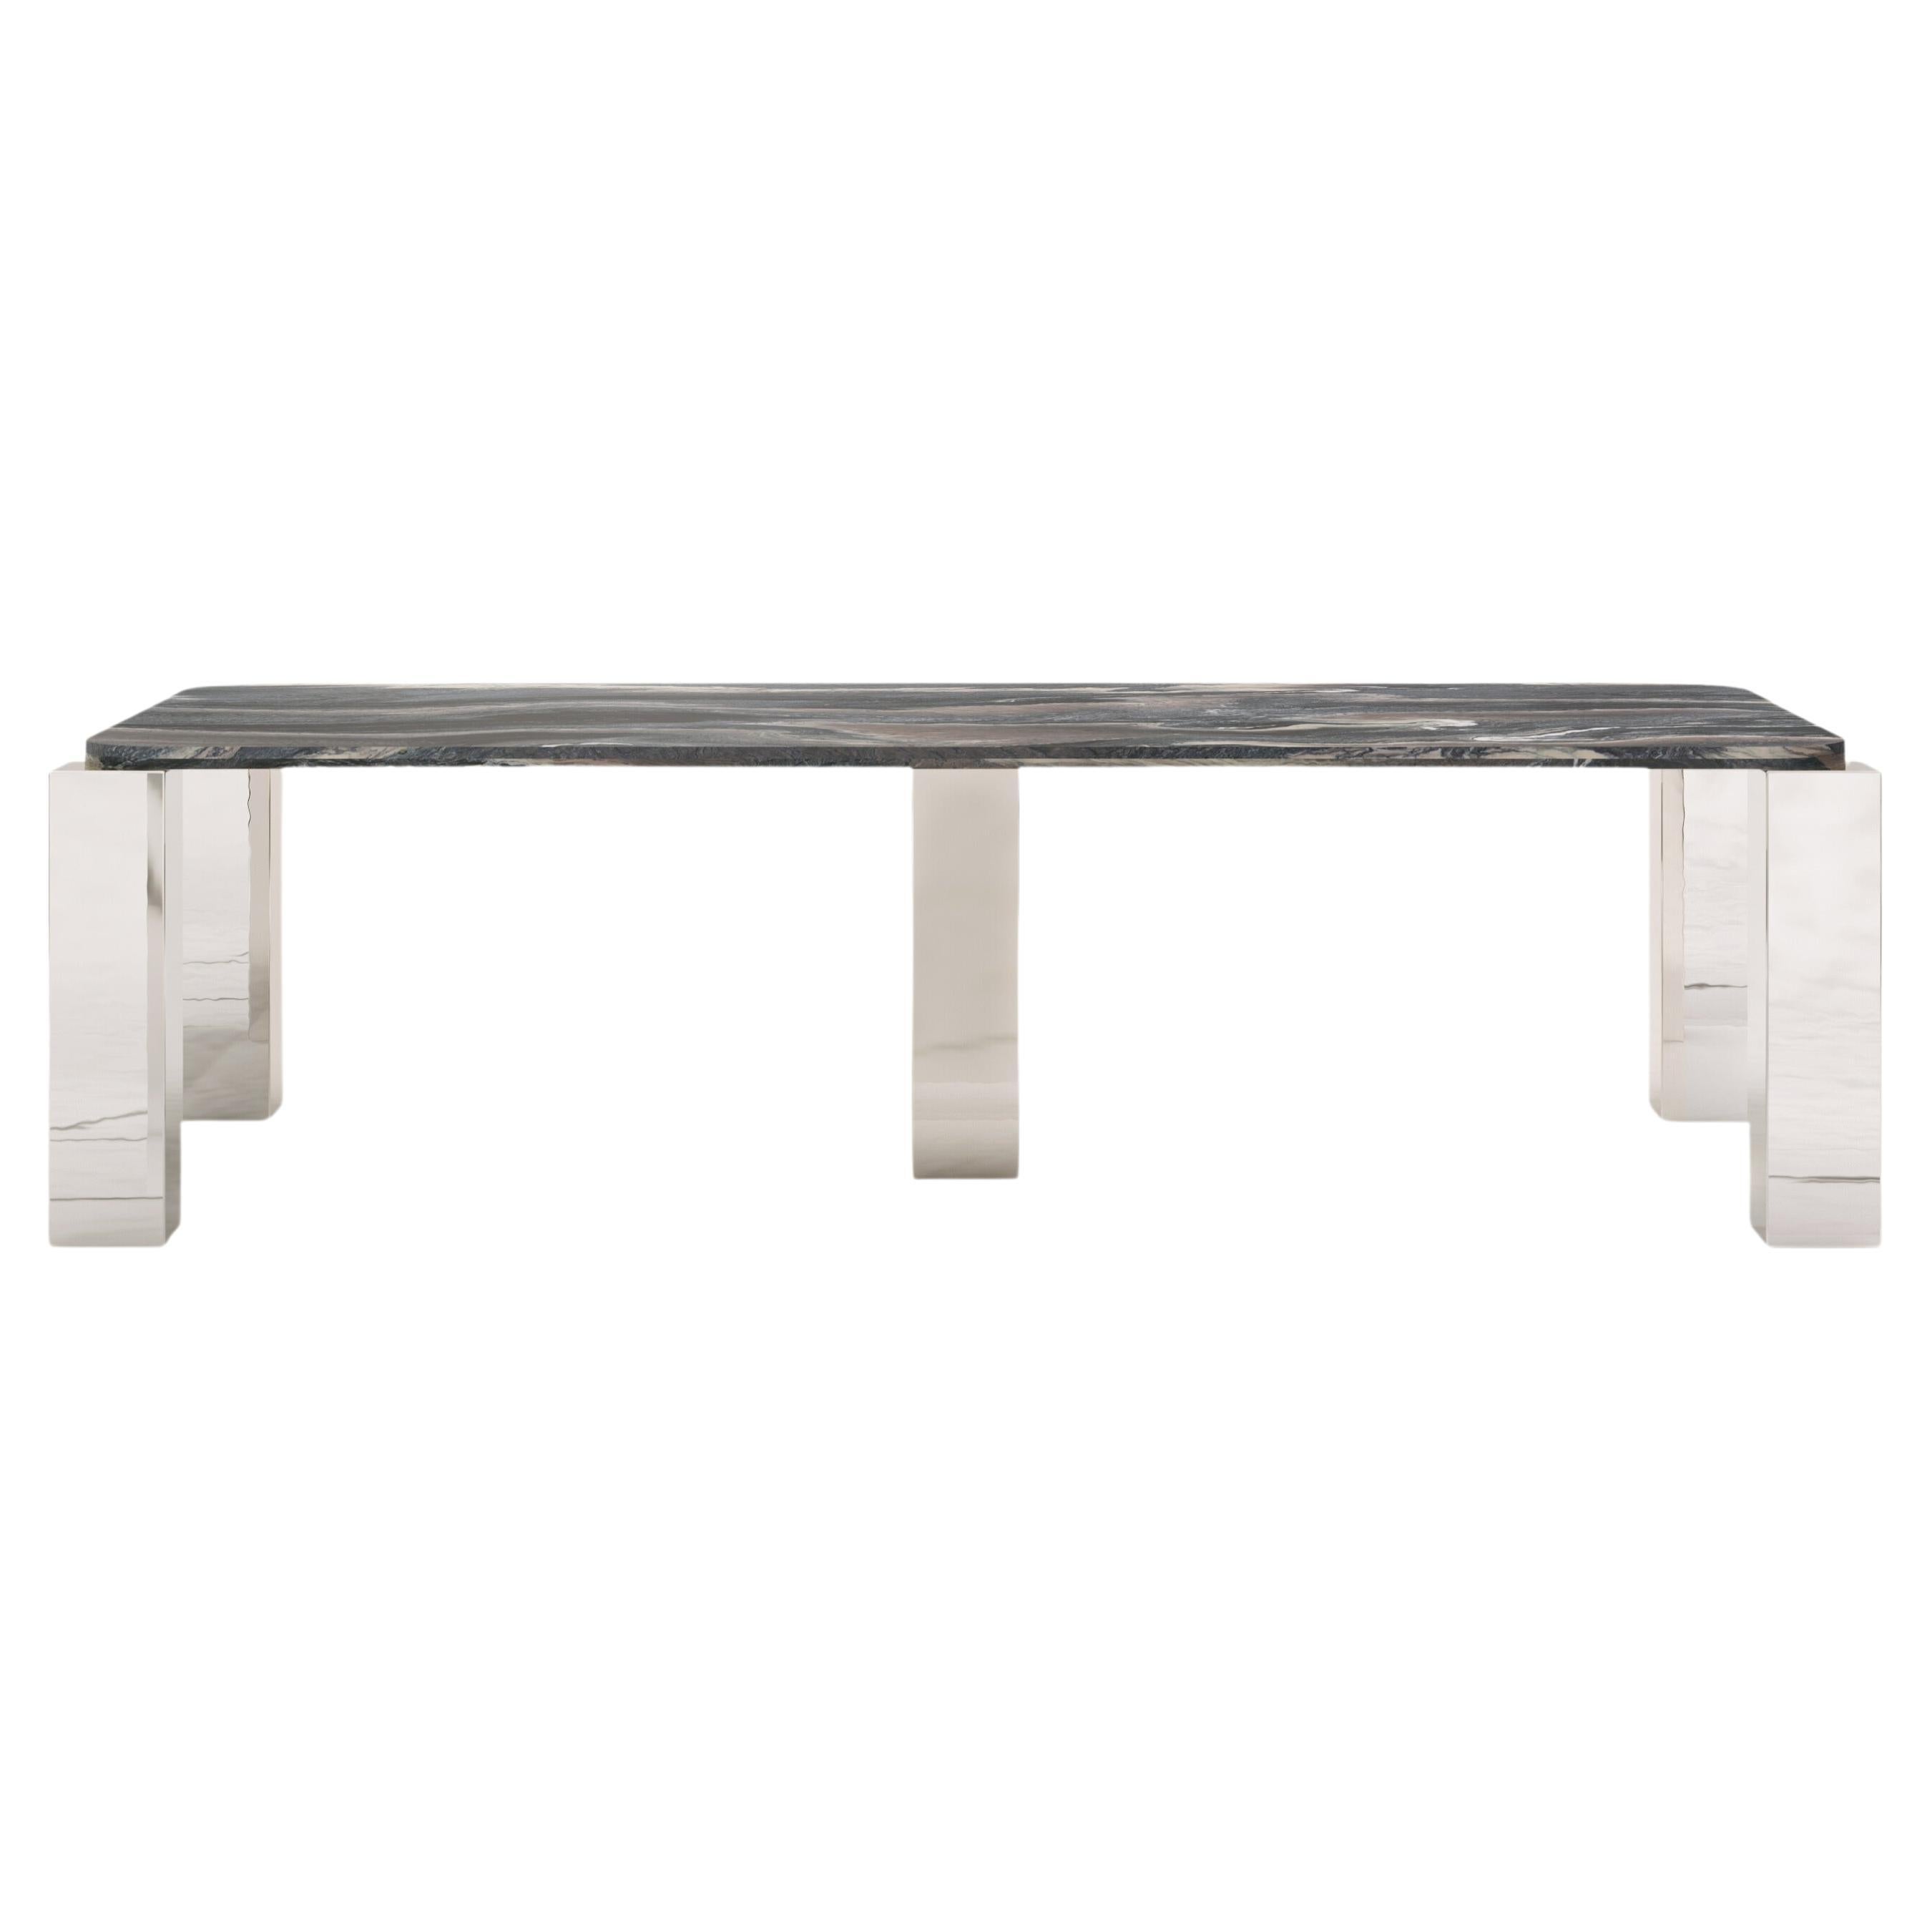 FORM(LA) Cubo Rectangle Dining Table 86”L x 44”W x 30”H Ondulato Marble & Chrome For Sale